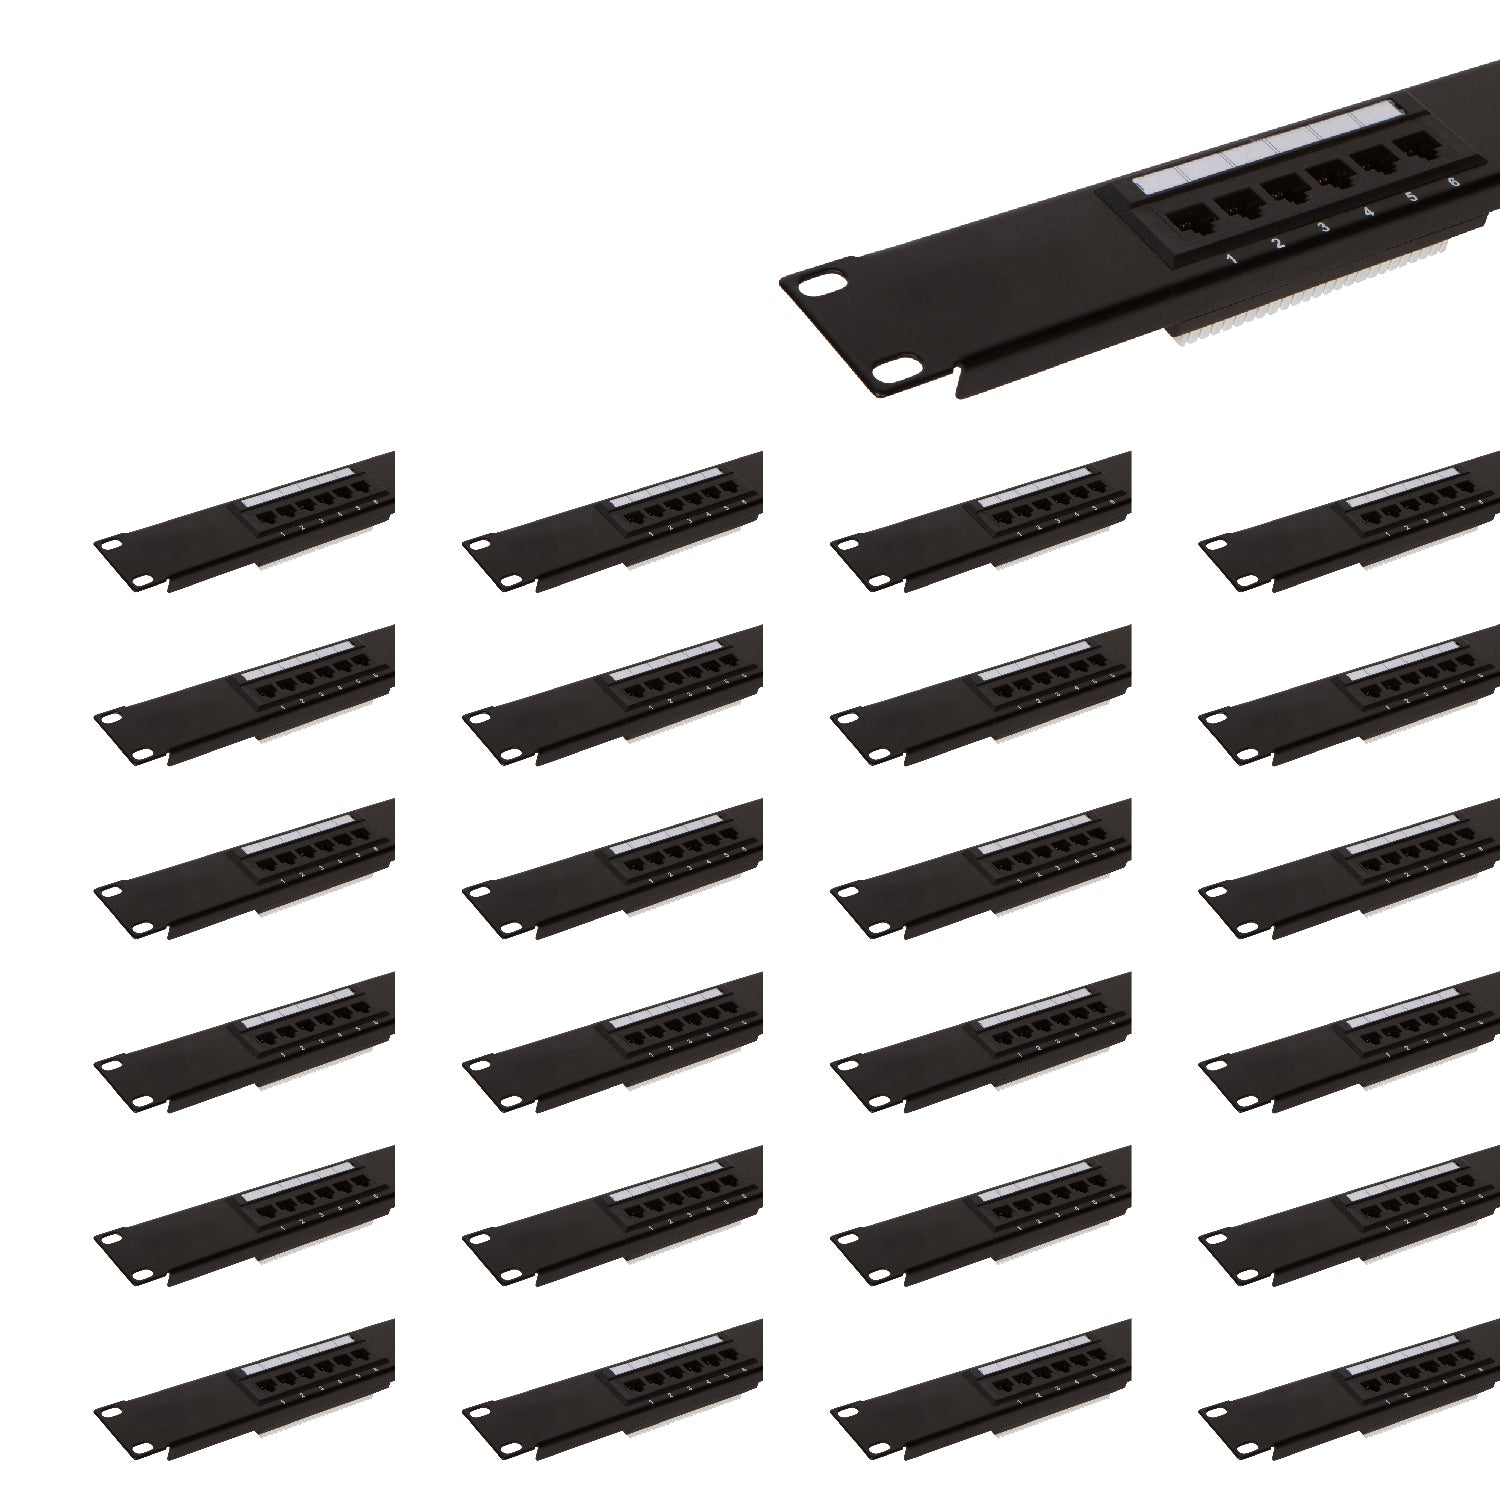 12 Port Cat6 Patch Panel with Punch Down Tool and Cable Management System (1, 12 Port) - Milena International Inc